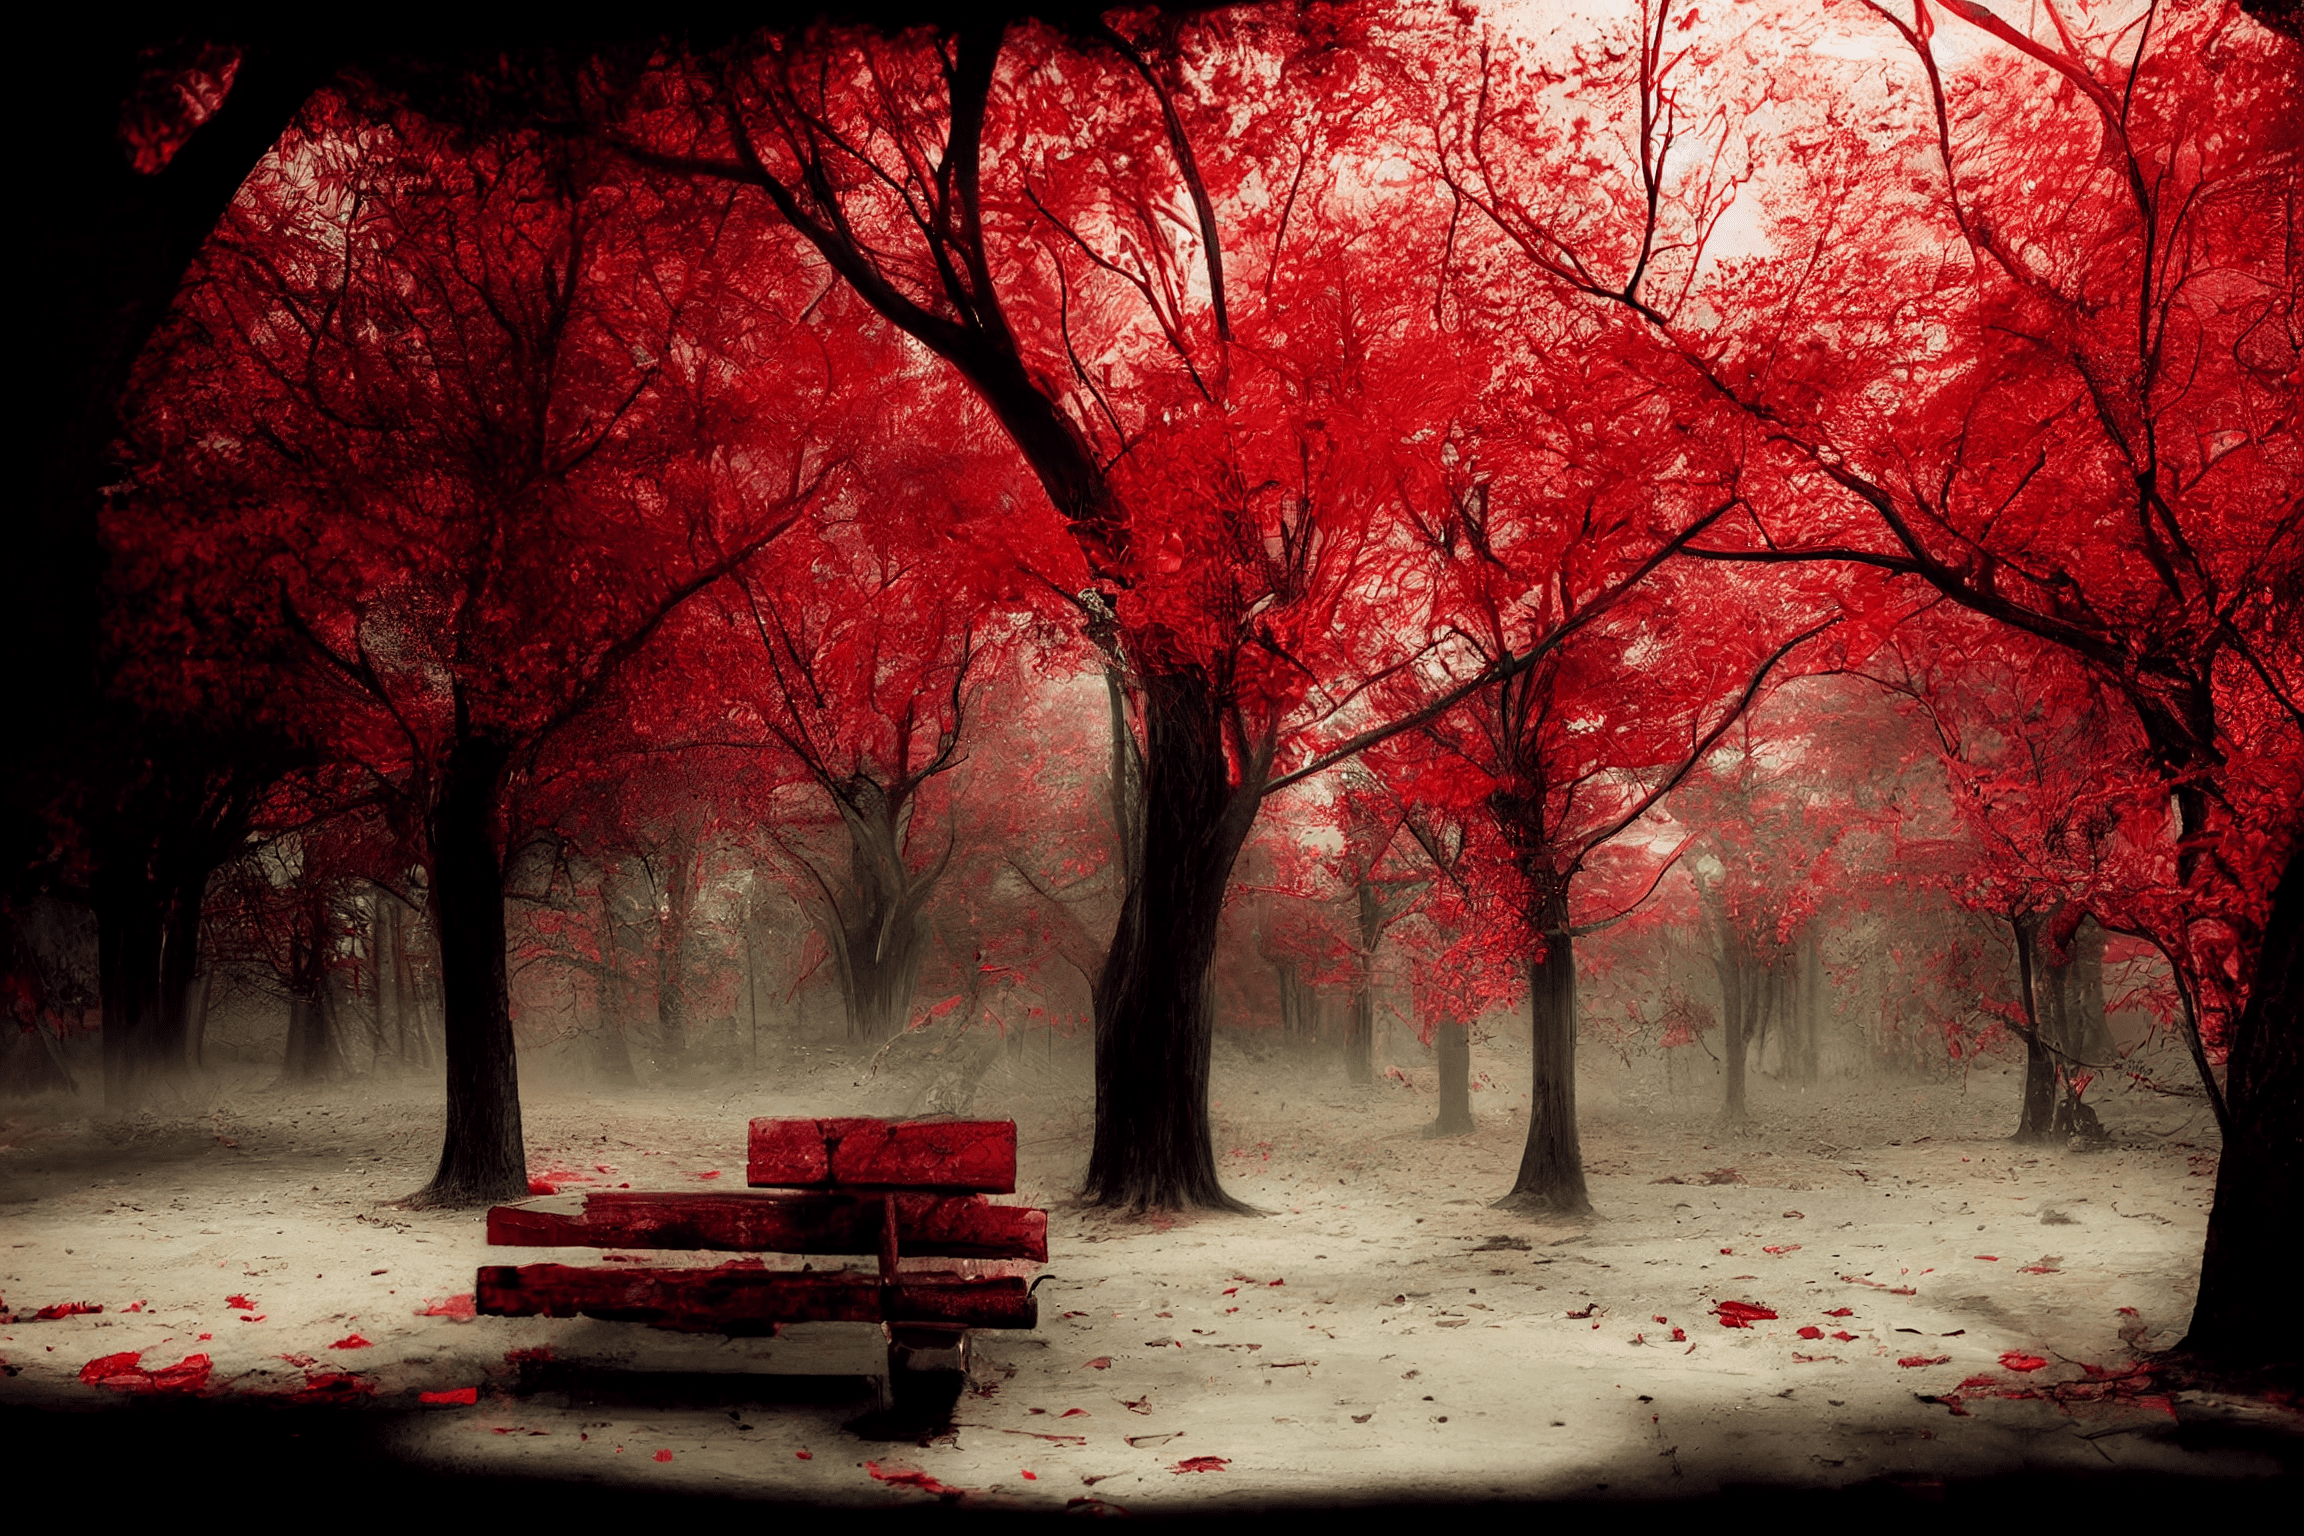 In a poorer shade no past could found – red bench